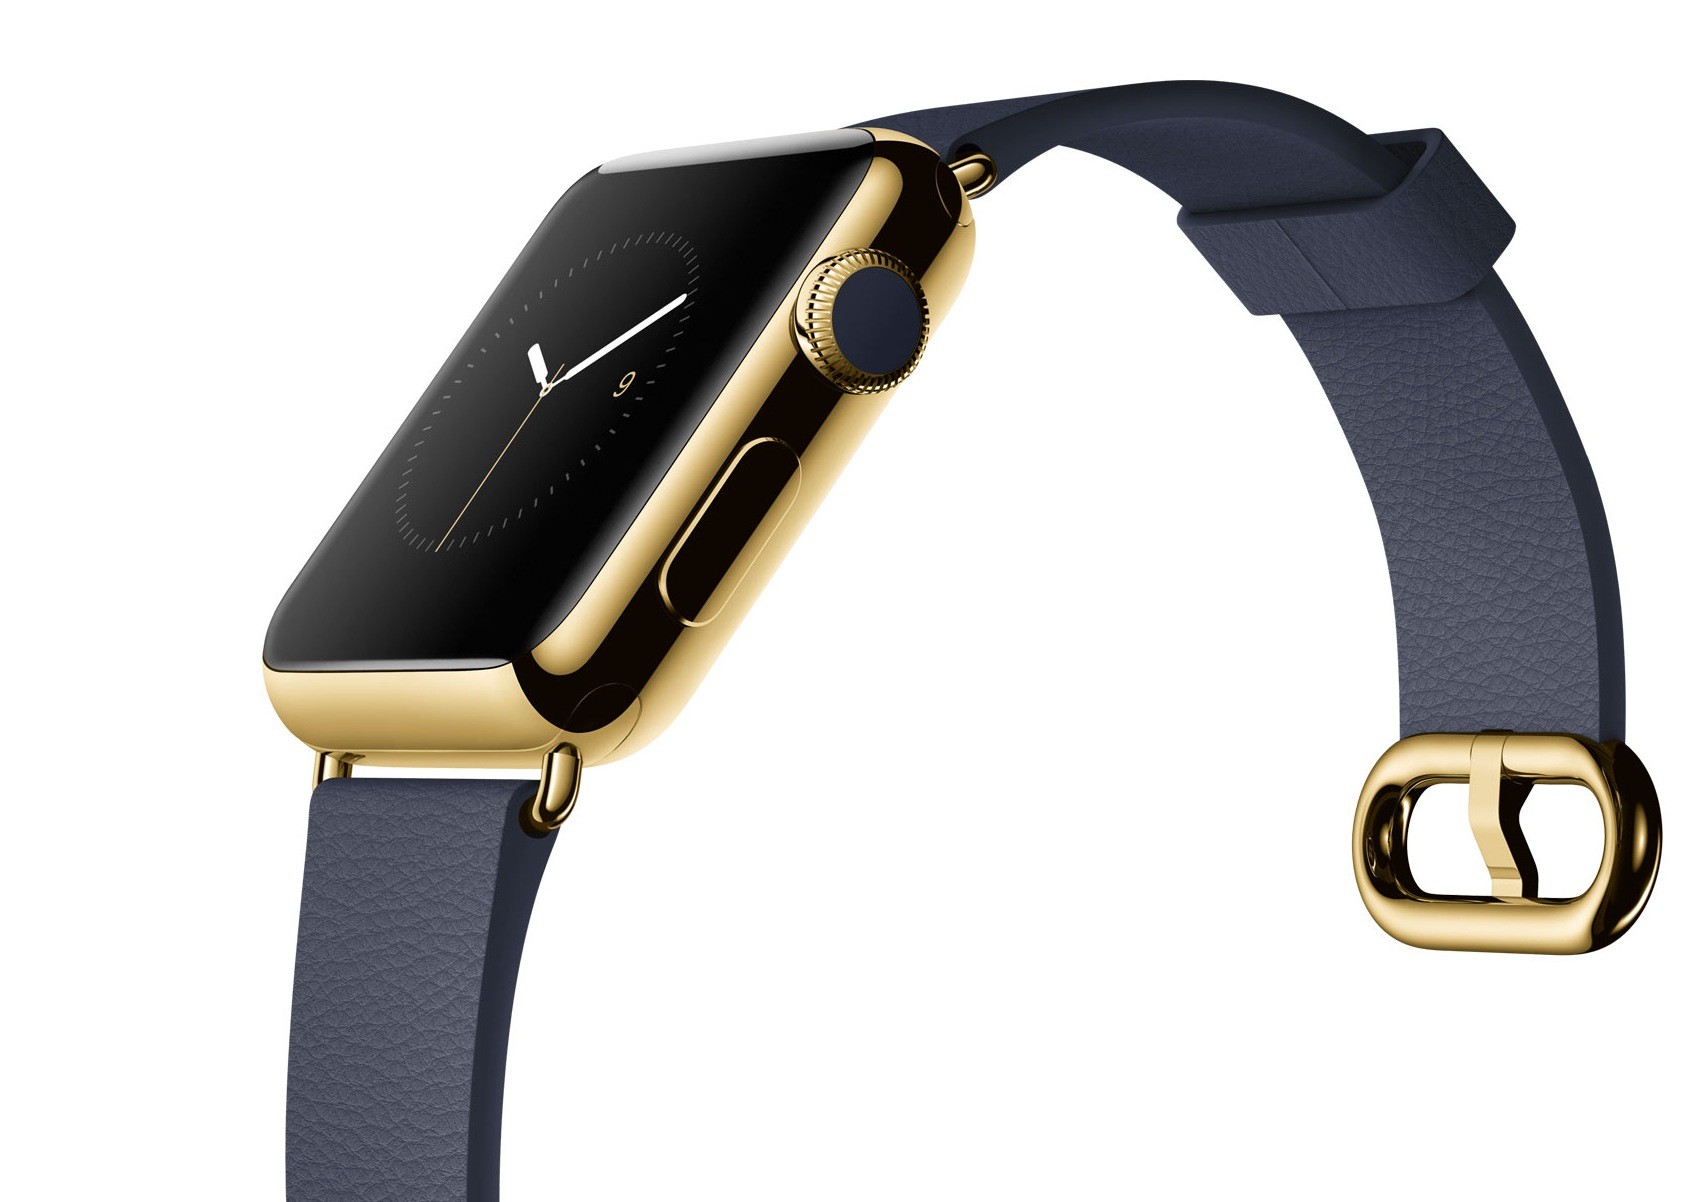 The-Gold-Apple-Watch-May-be-Sold-for-1200-928-76-458790-2